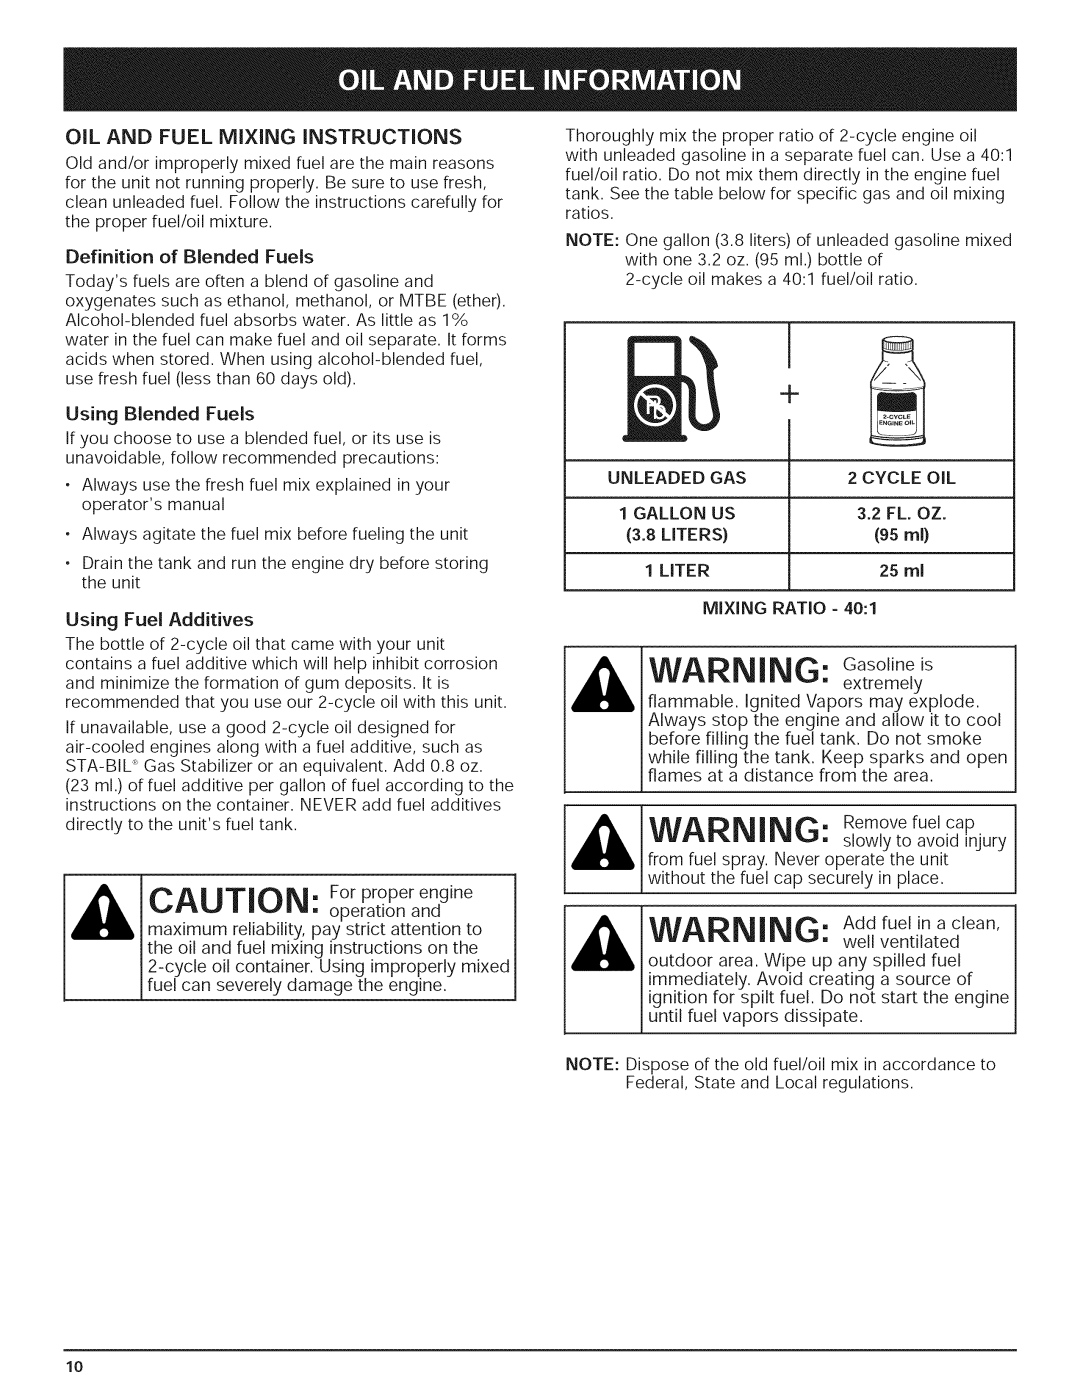 Yard-Man 769.01408 manual CAUTION Forproperengine, Oil And Fuel Mixing Instructions 